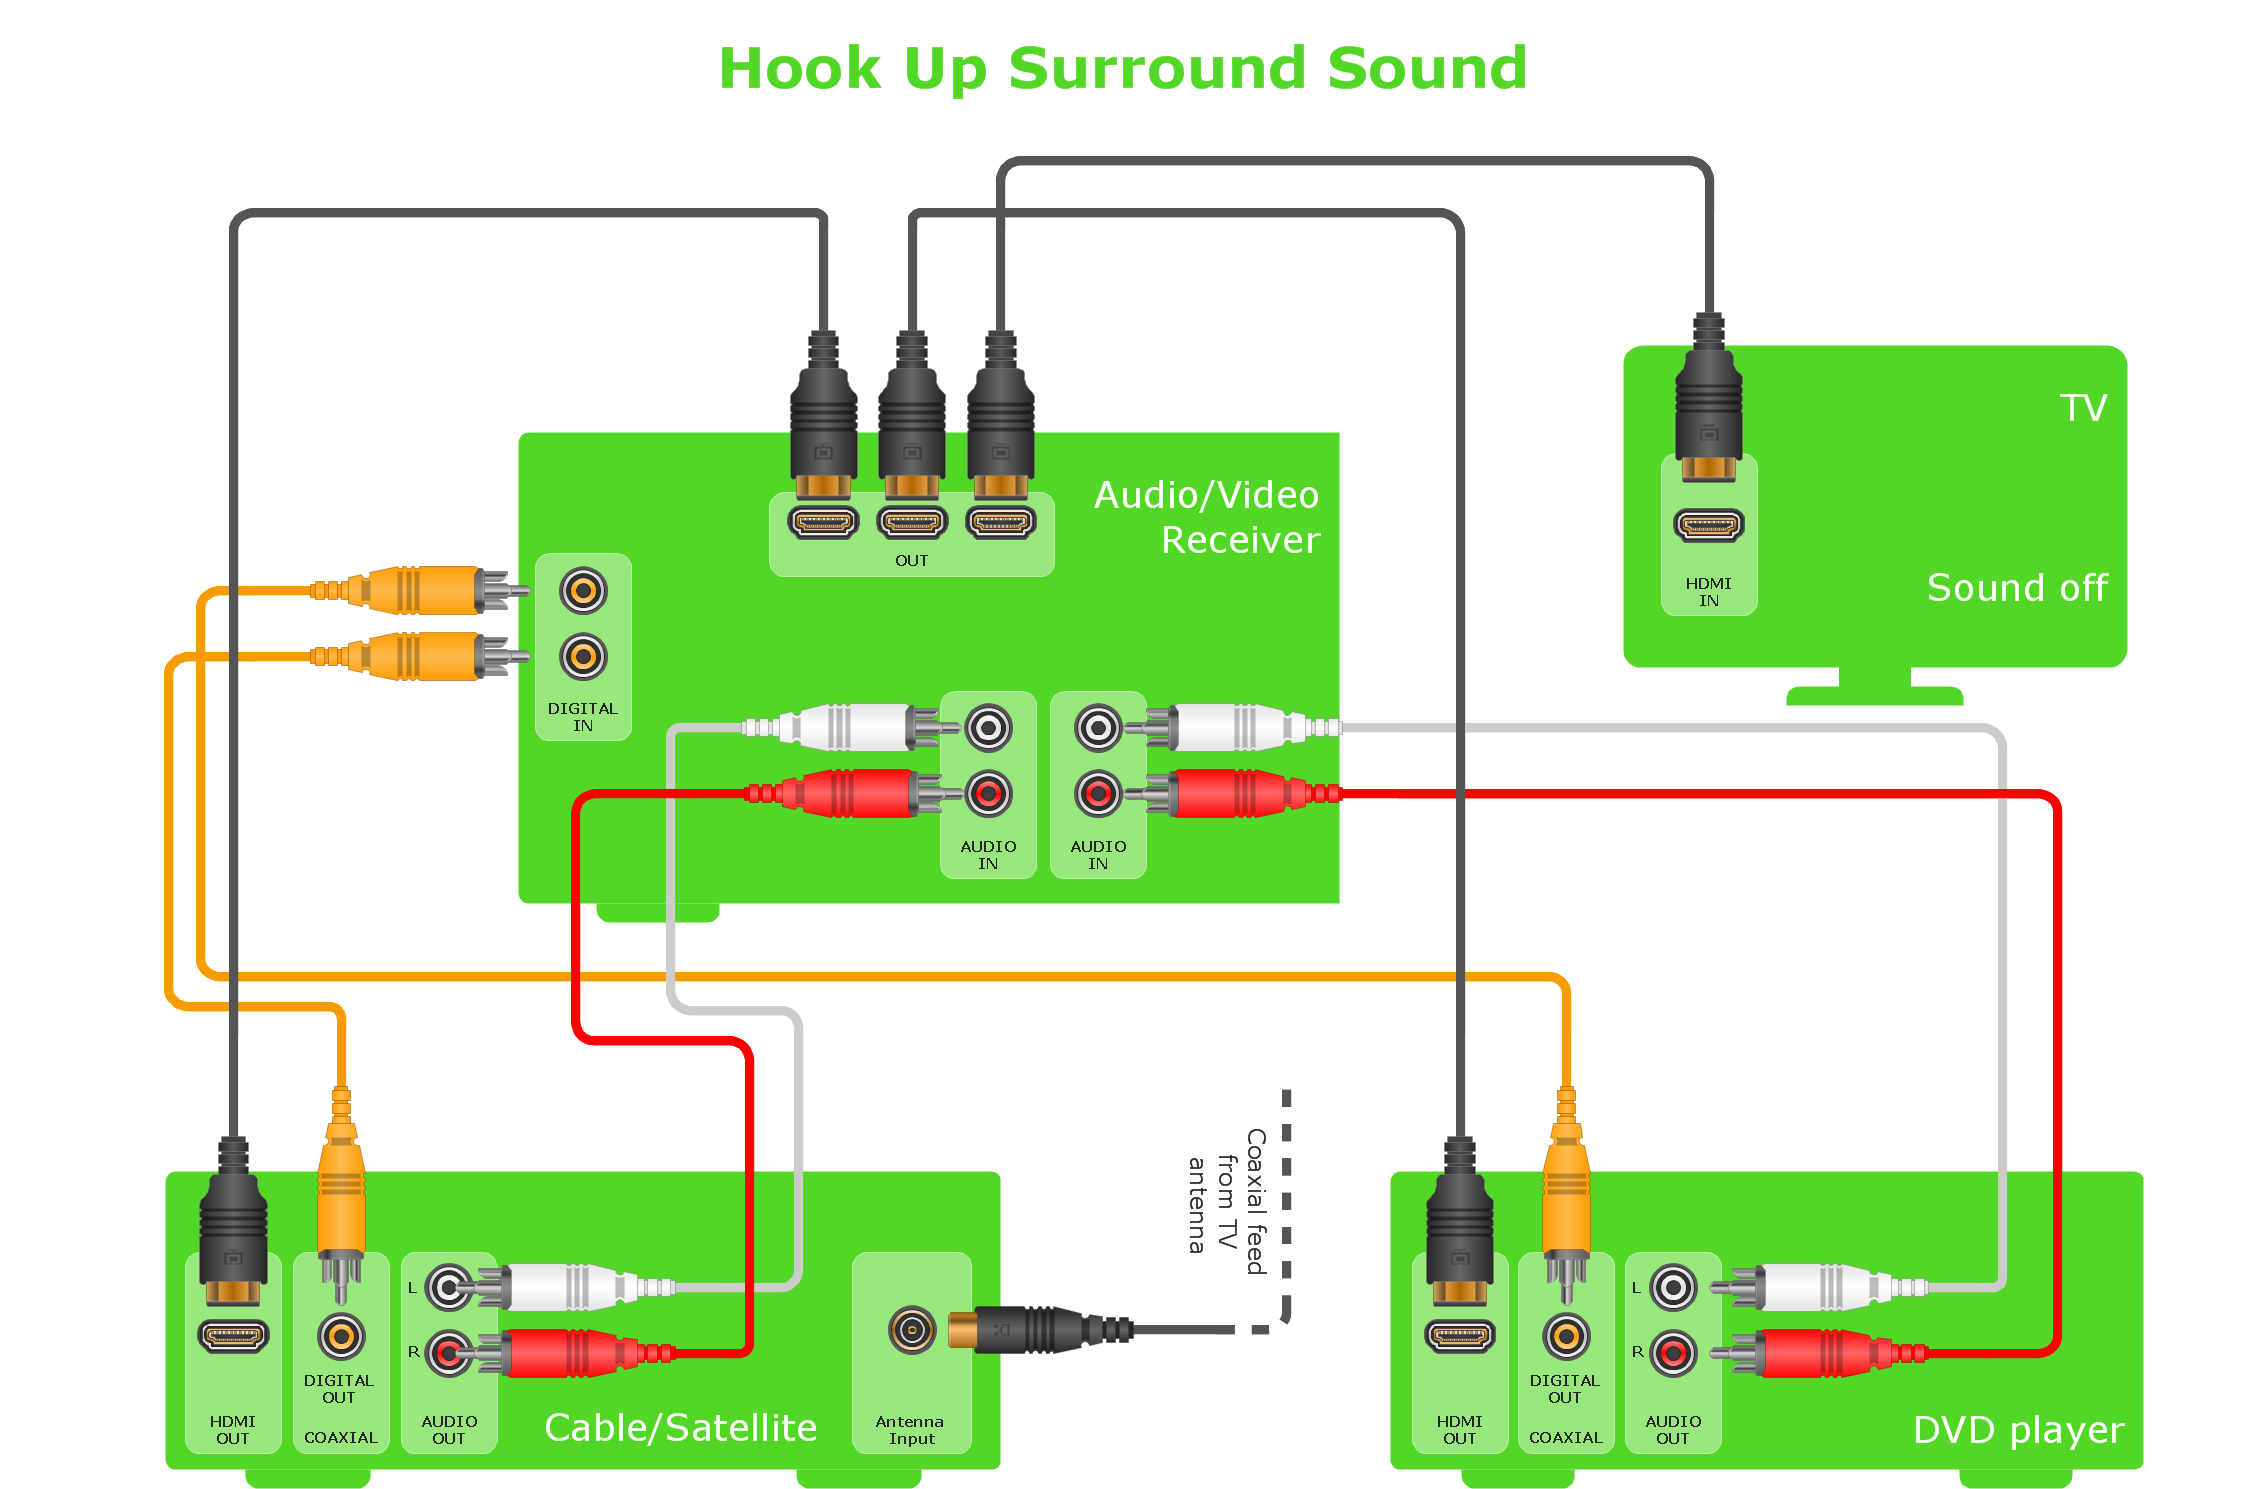 Hookup diagram - Home entertainment system with surround sound